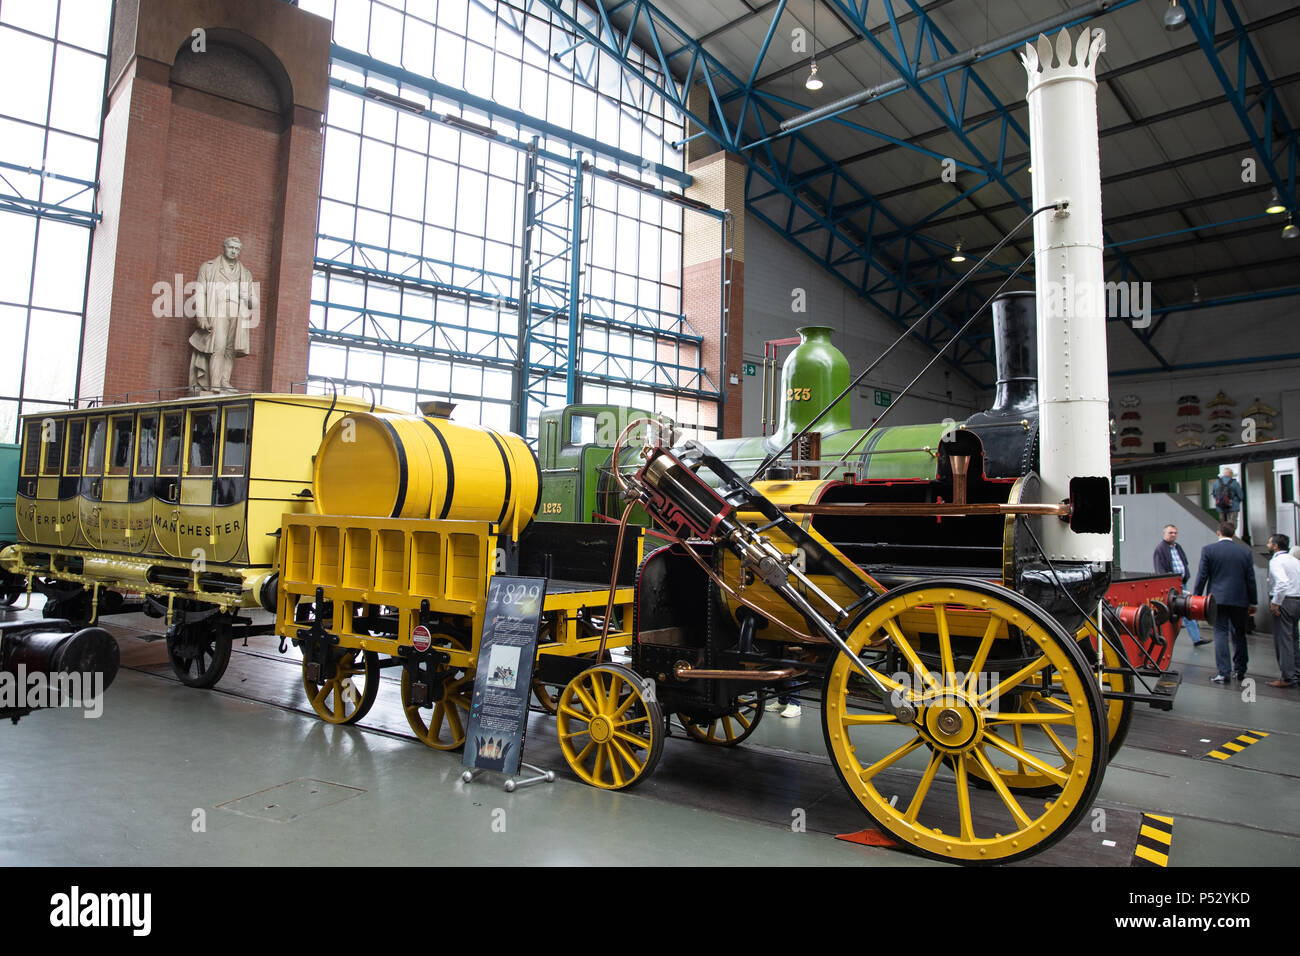 Le National Railway Museum, York, Angleterre Banque D'Images